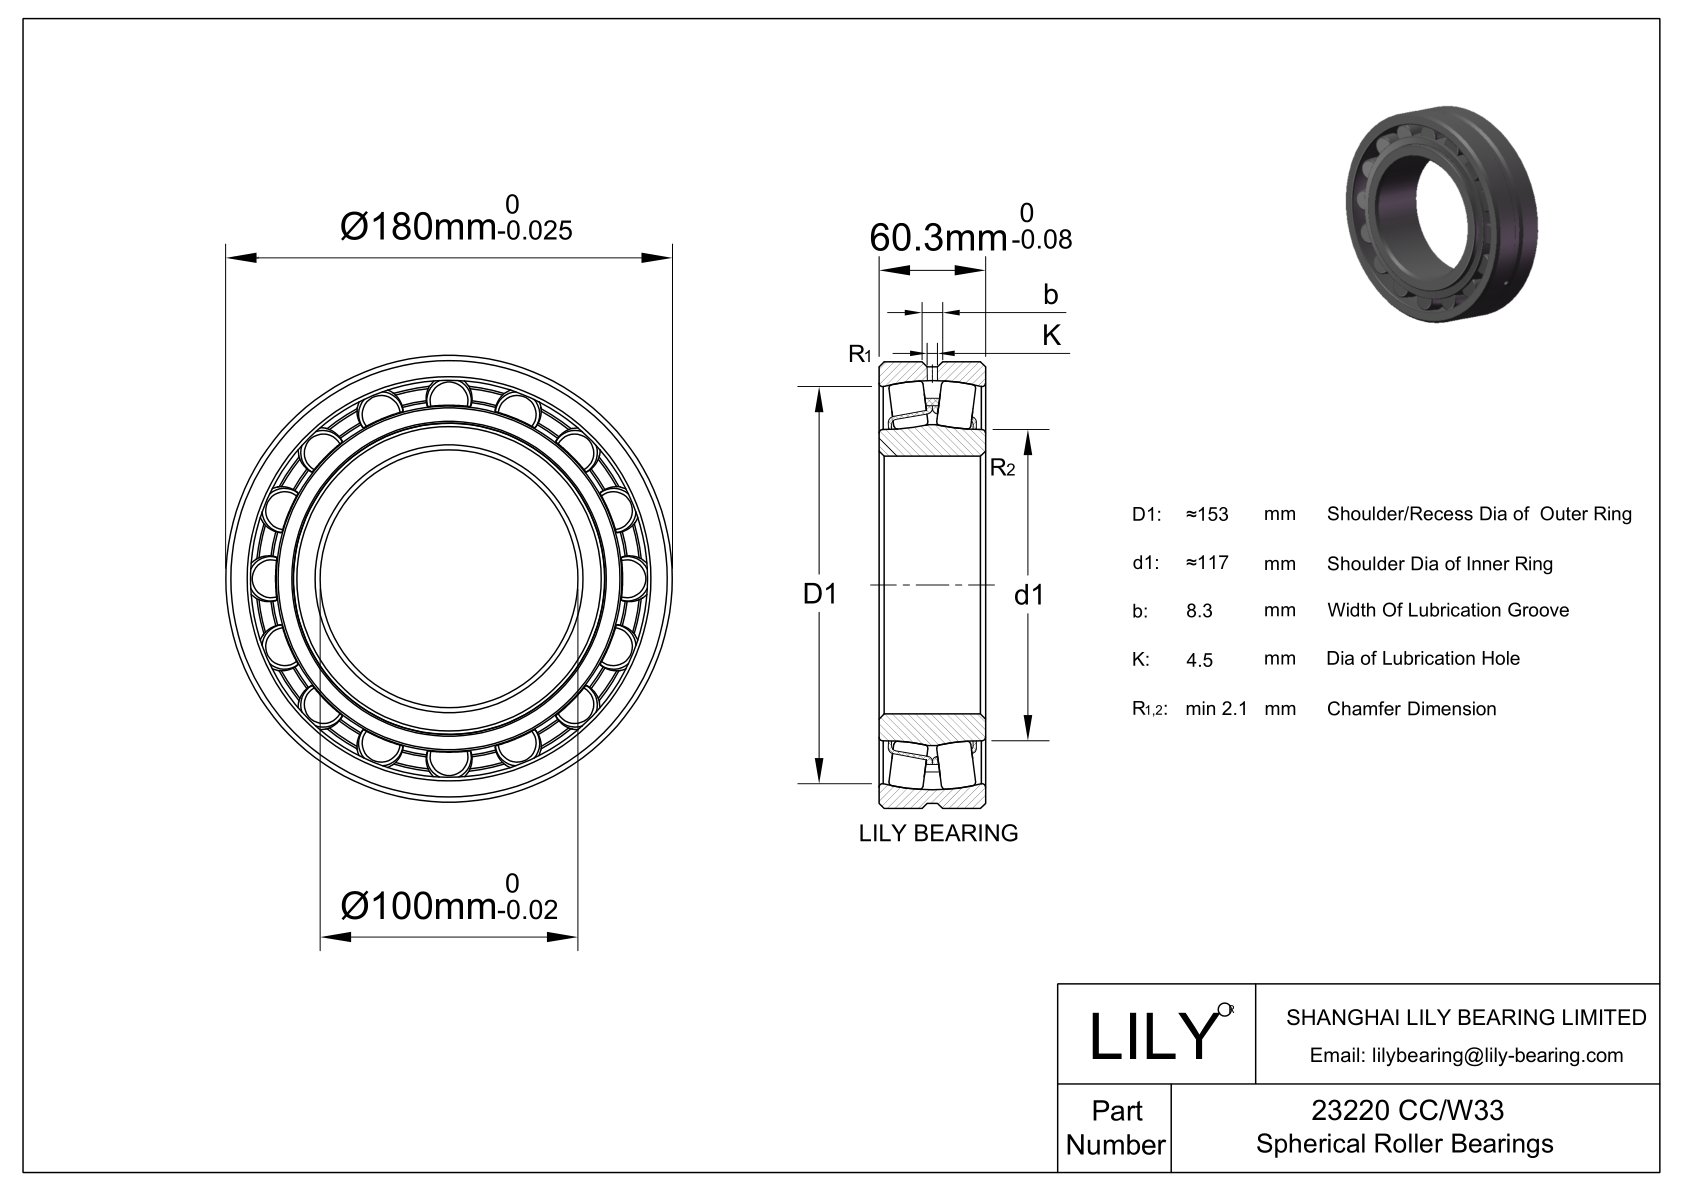 23220 CC/W33 Double Row Spherical Roller Bearing cad drawing